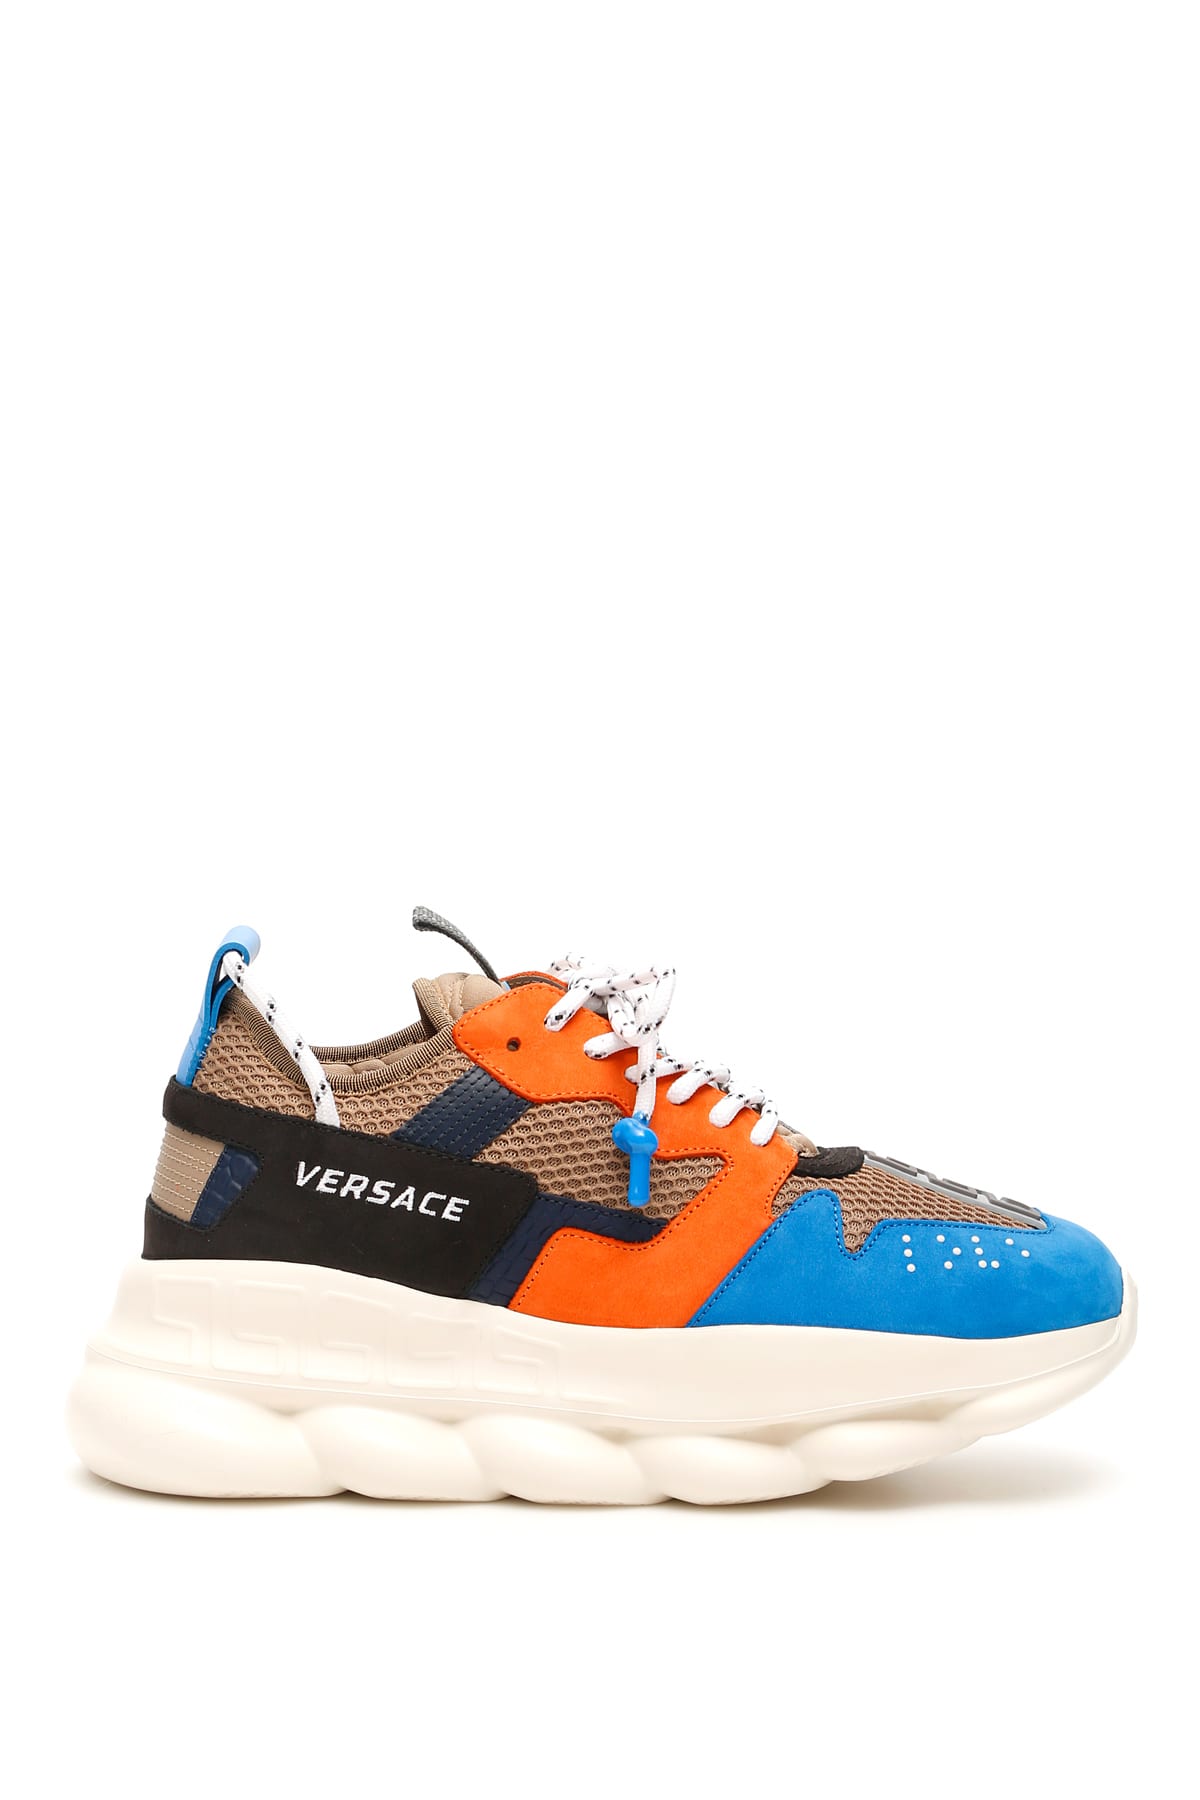 VERSACE CHAIN REACTION 2 SNEAKERS,11235510